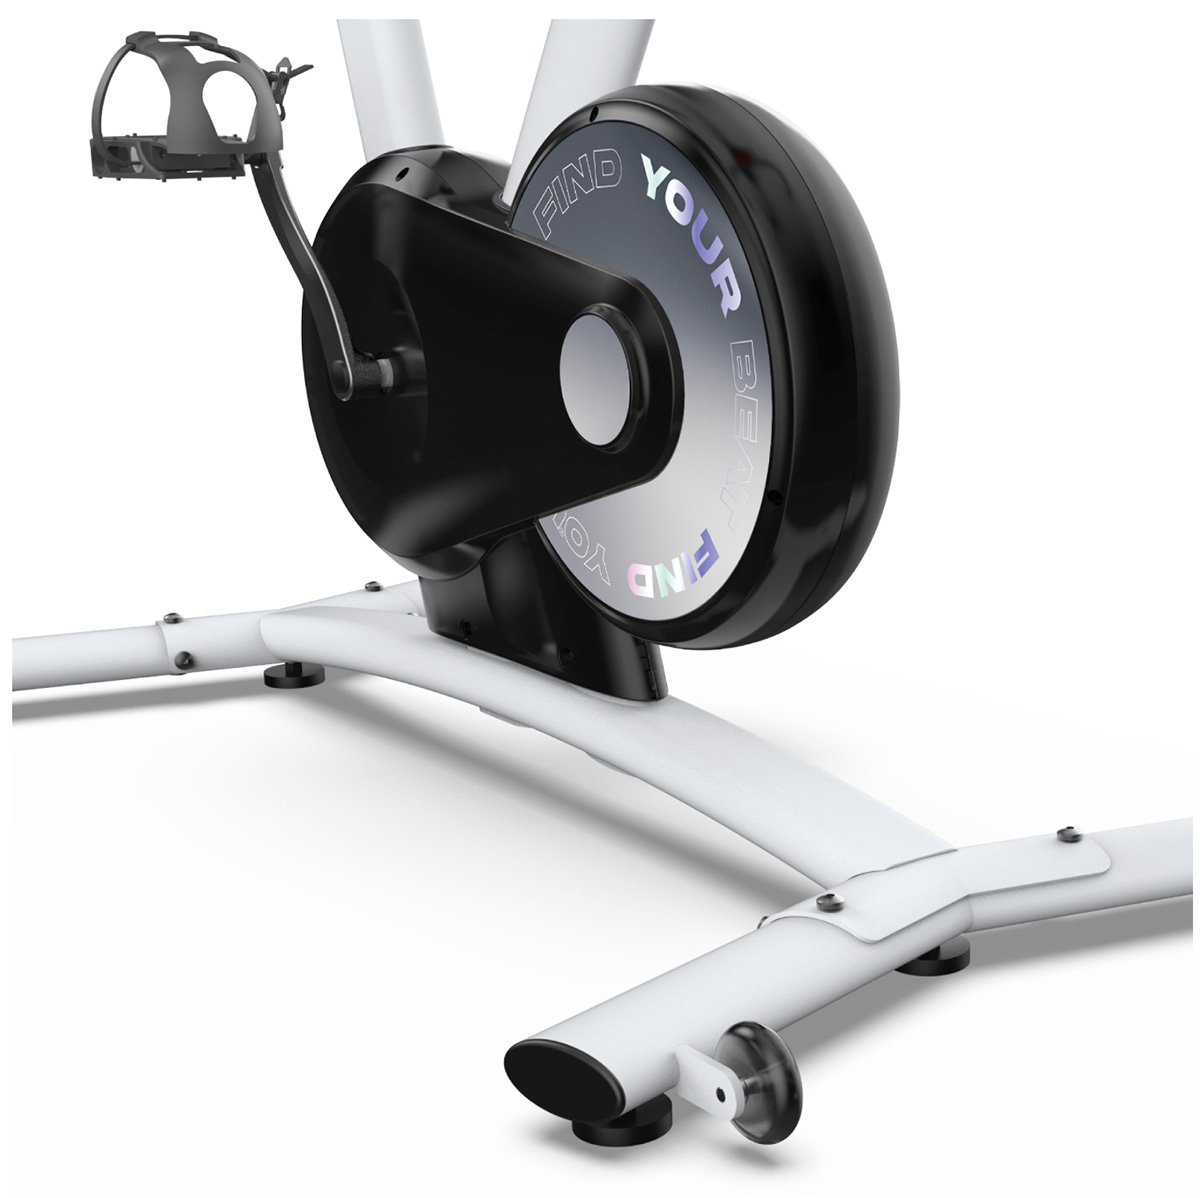 freebeat Boom Bike Offers At-Home Cardio Solution Without Need for Extra Space